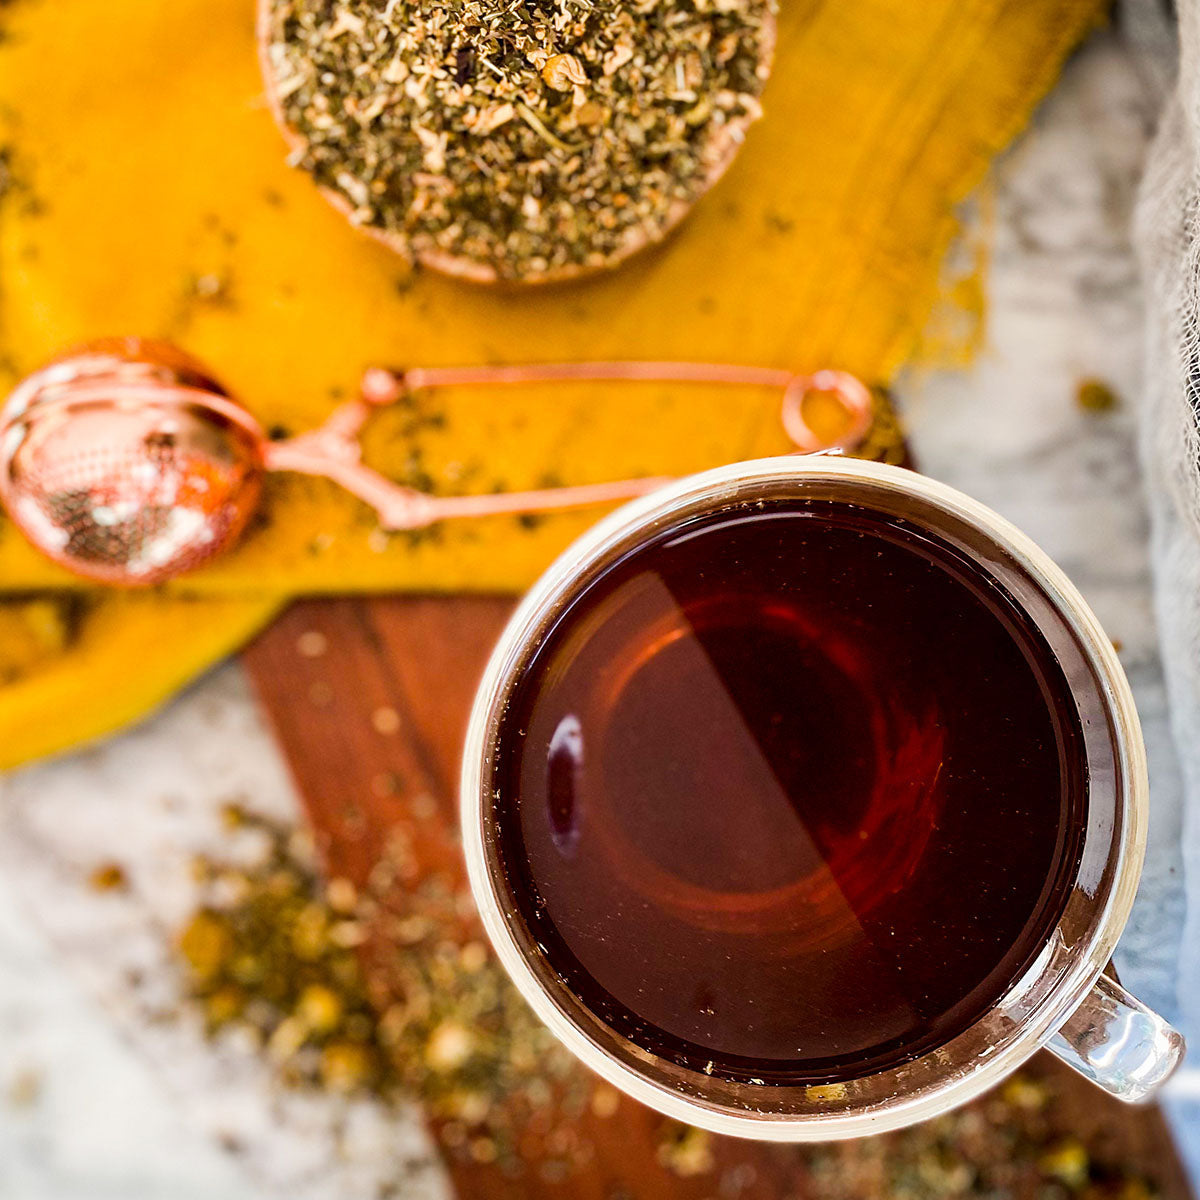 A brewed cup of Cold Comfort tea is surrounded by a yellow napkin and tea ball infuser with loose leaf tea on the table flowing out of a bowl.